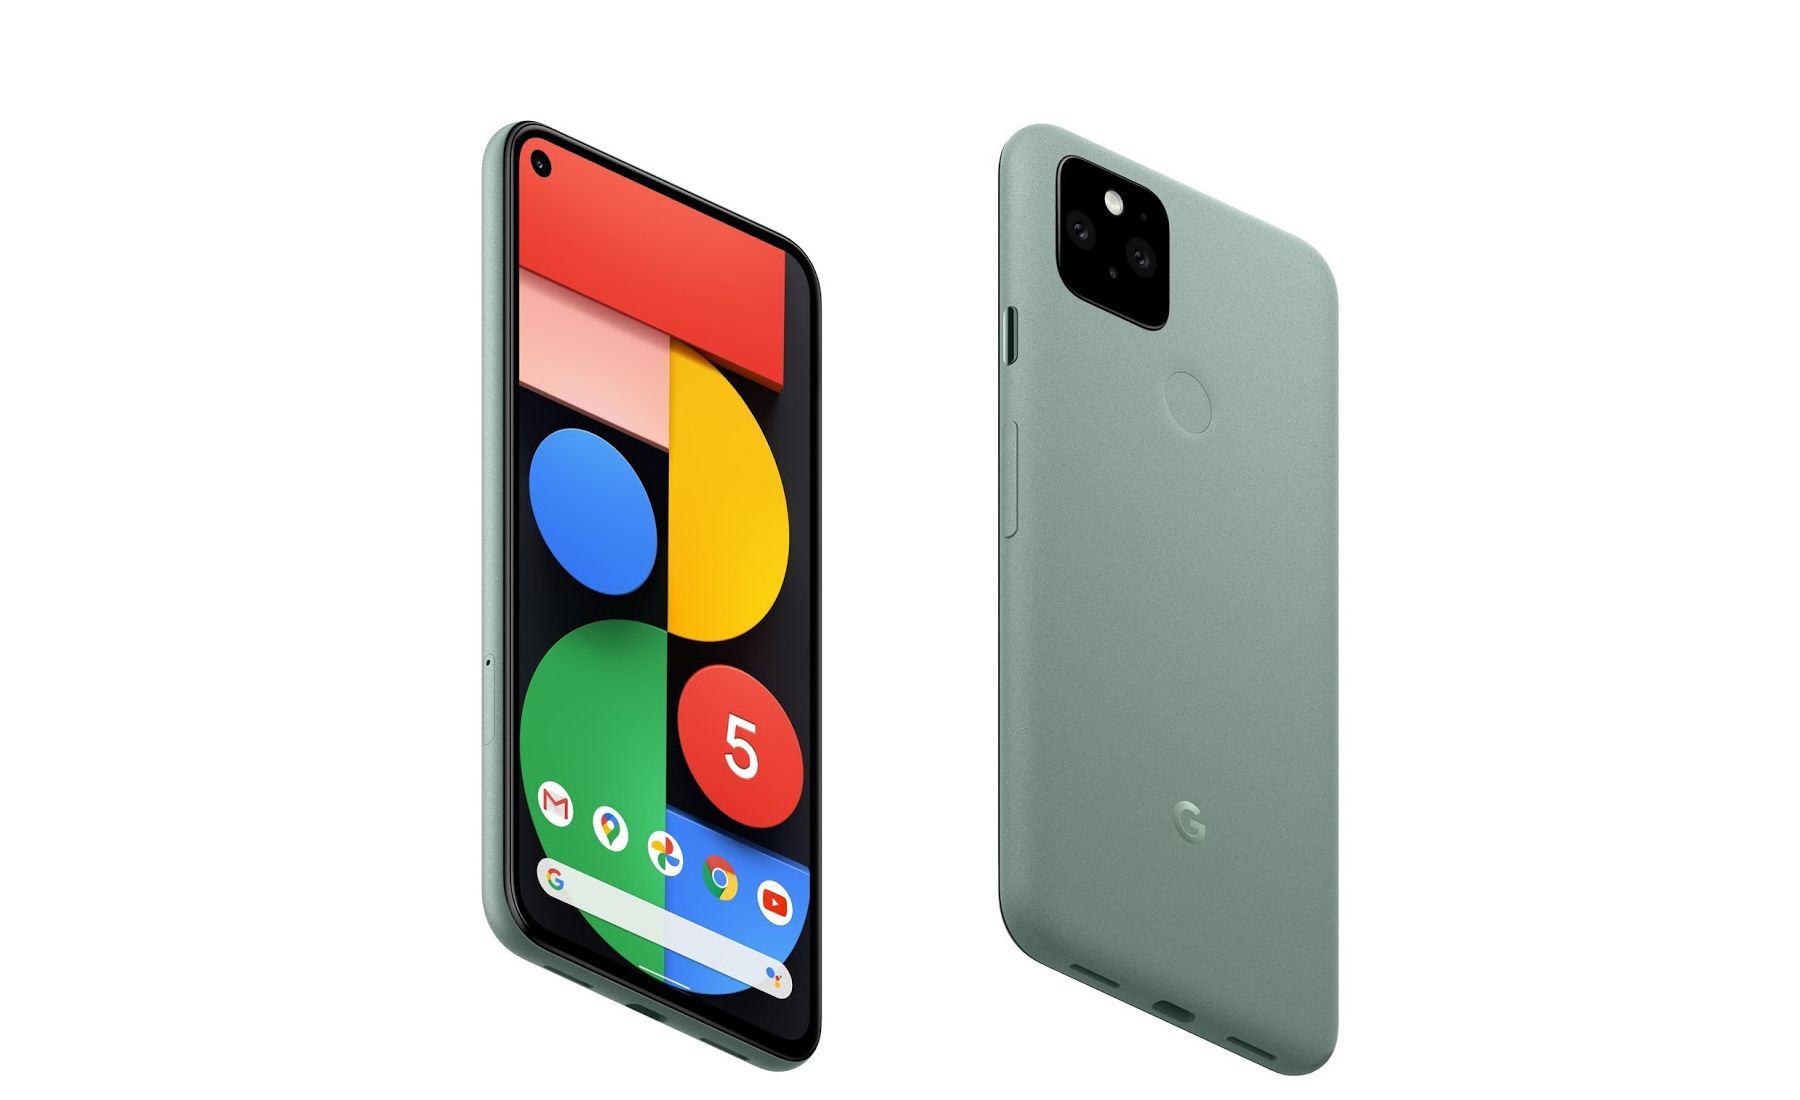 Connecting Pixel 4 To Mac: A Step-by-Step Guide